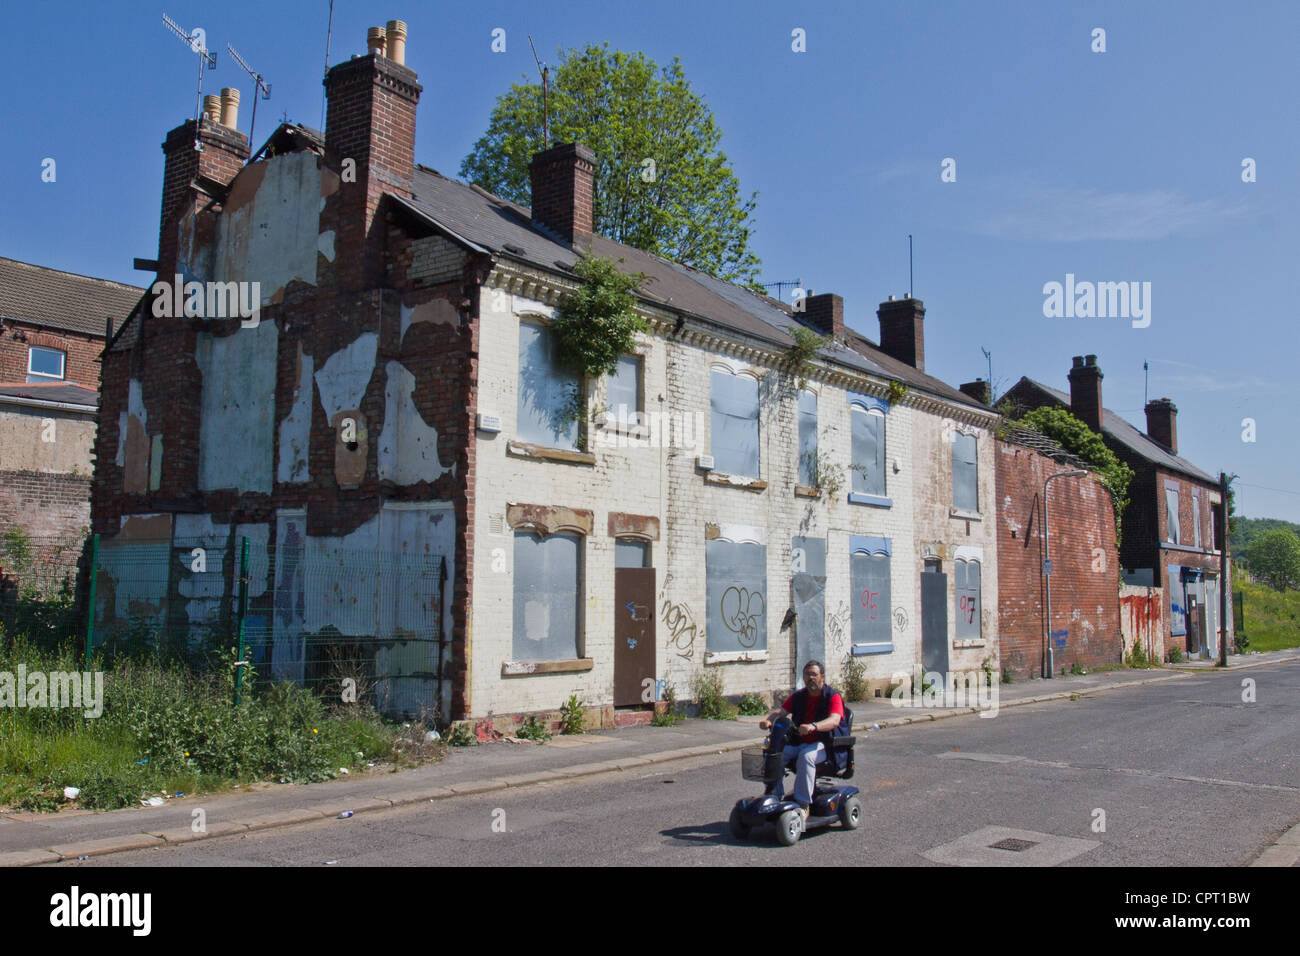 A man on a mobility scooter drives past a row of run down and abandoned derelict houses in Sheffield, South Yorkshire, England Stock Photo